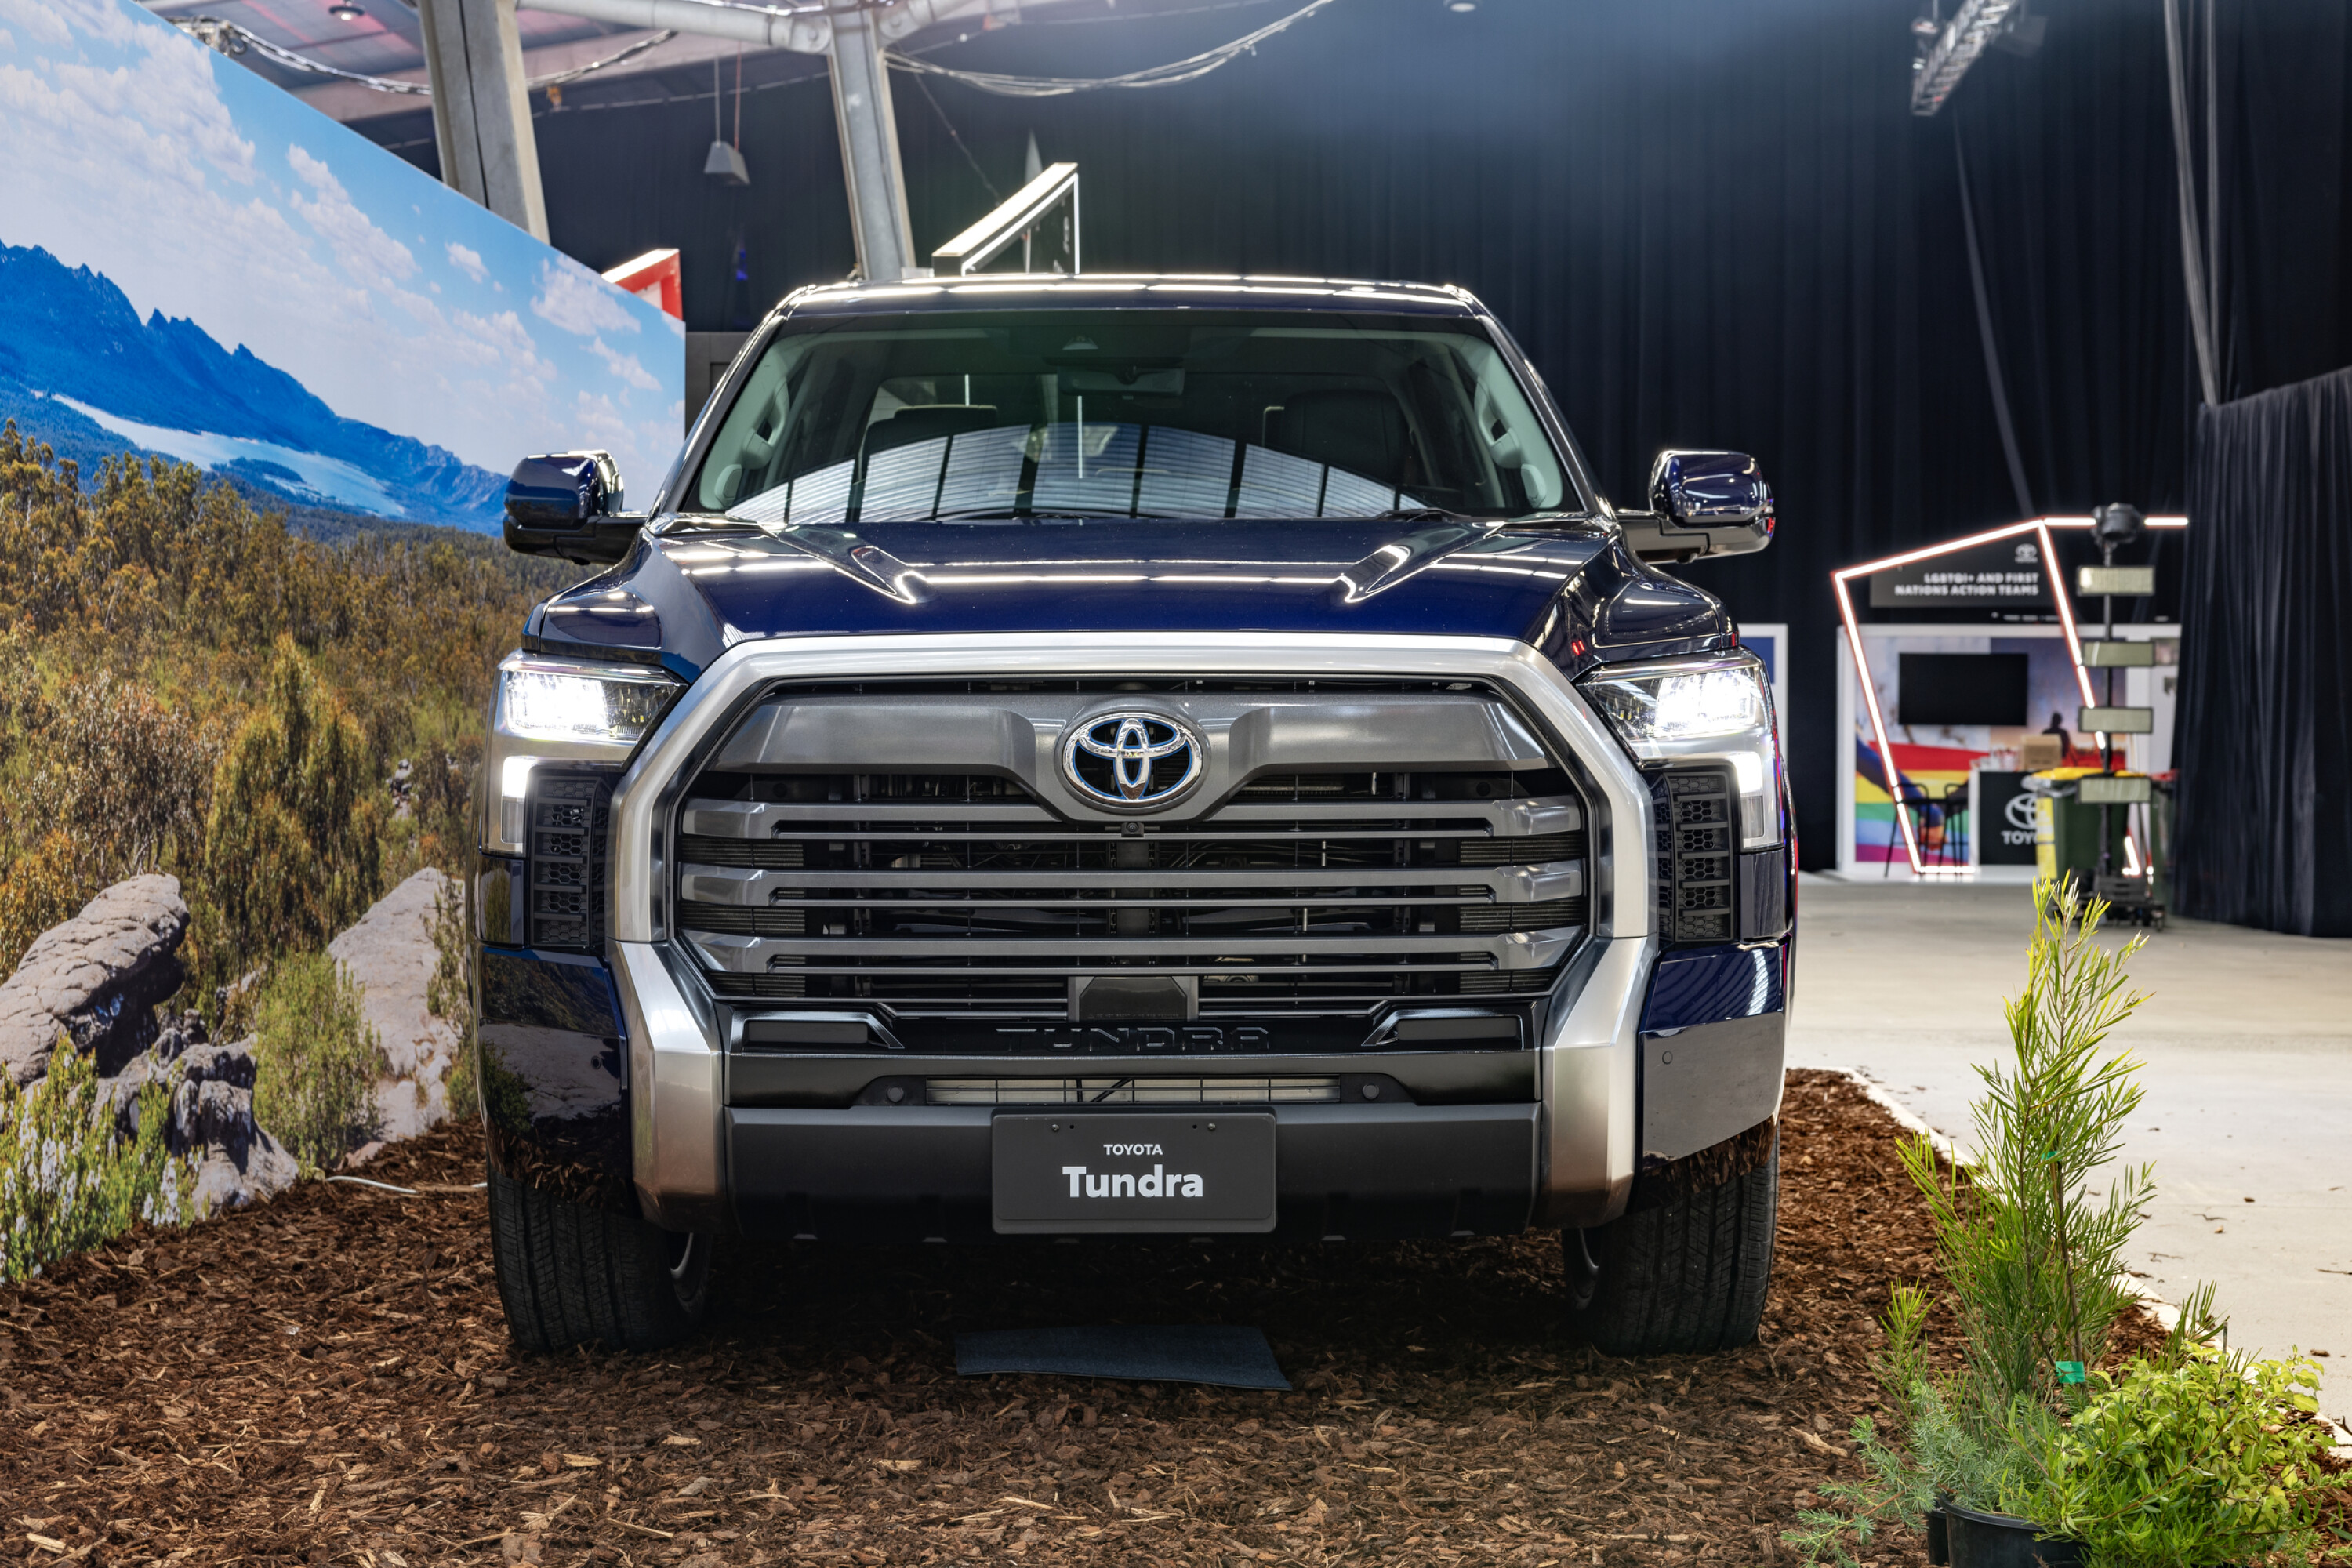 2024 Toyota Tundra 300 utes to be leased, still not confirmed for